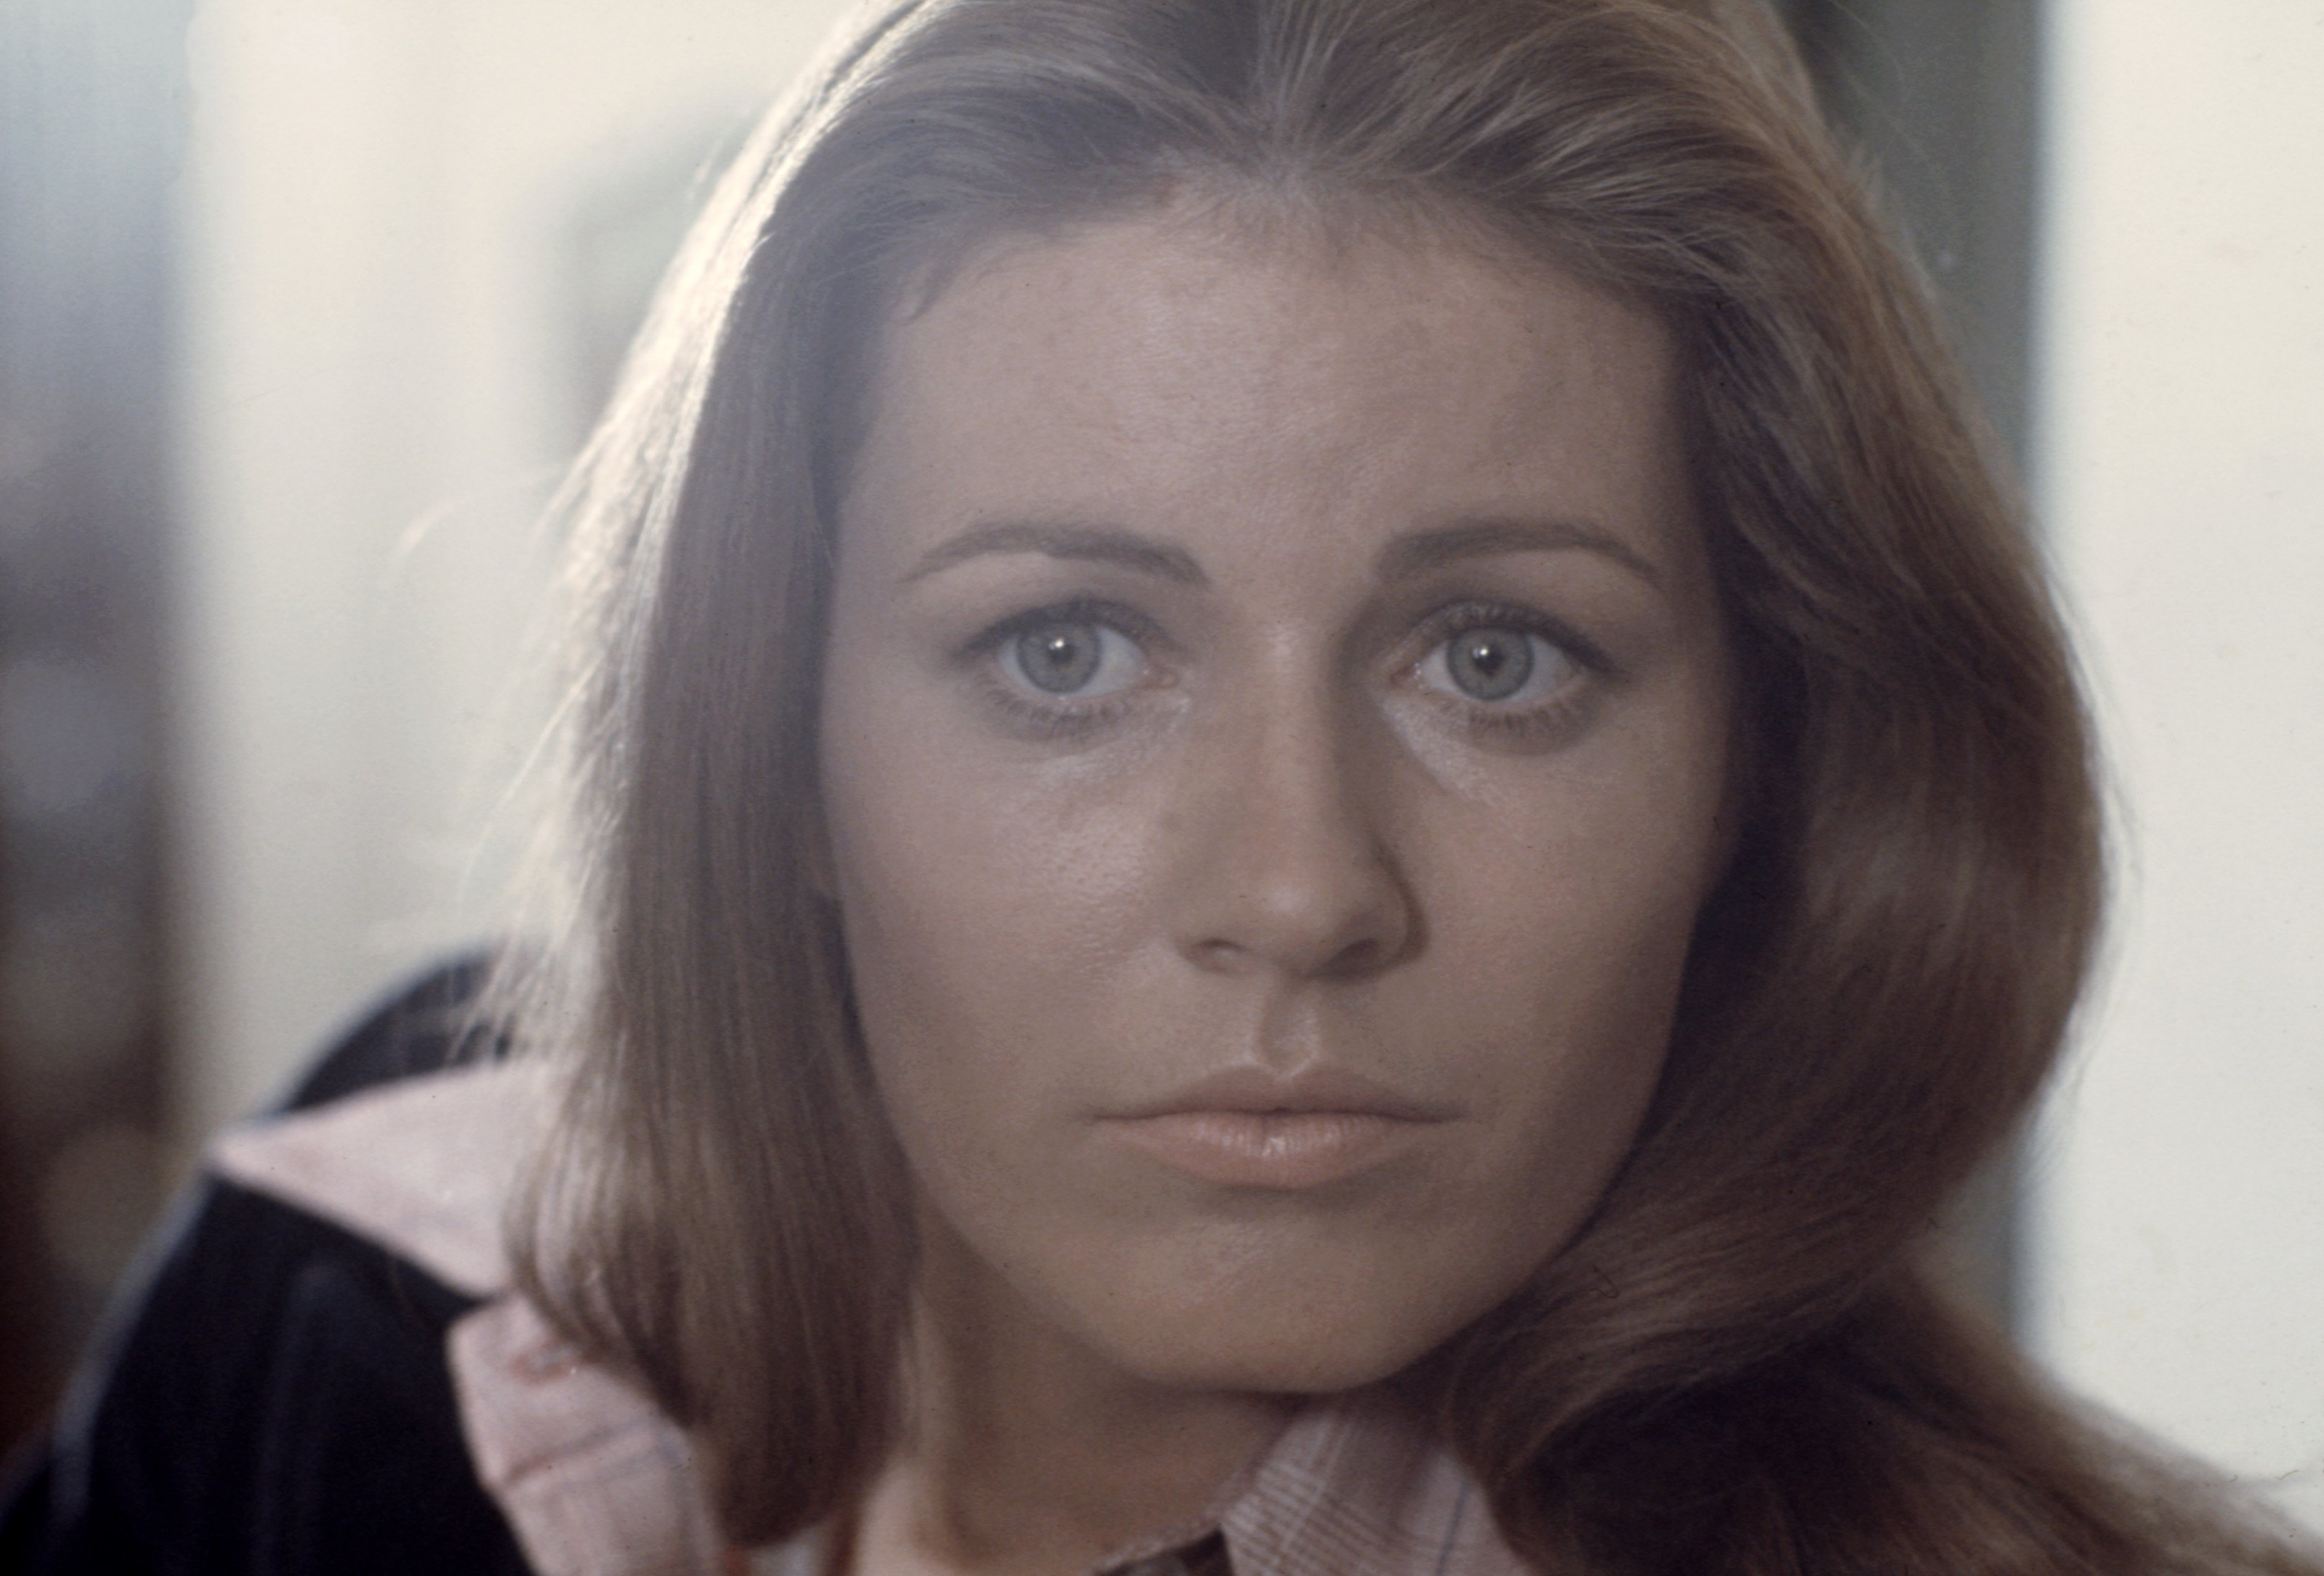 Patty Duke on the set of "The Wide World of Mystery" in 1974. | Source: Getty Images